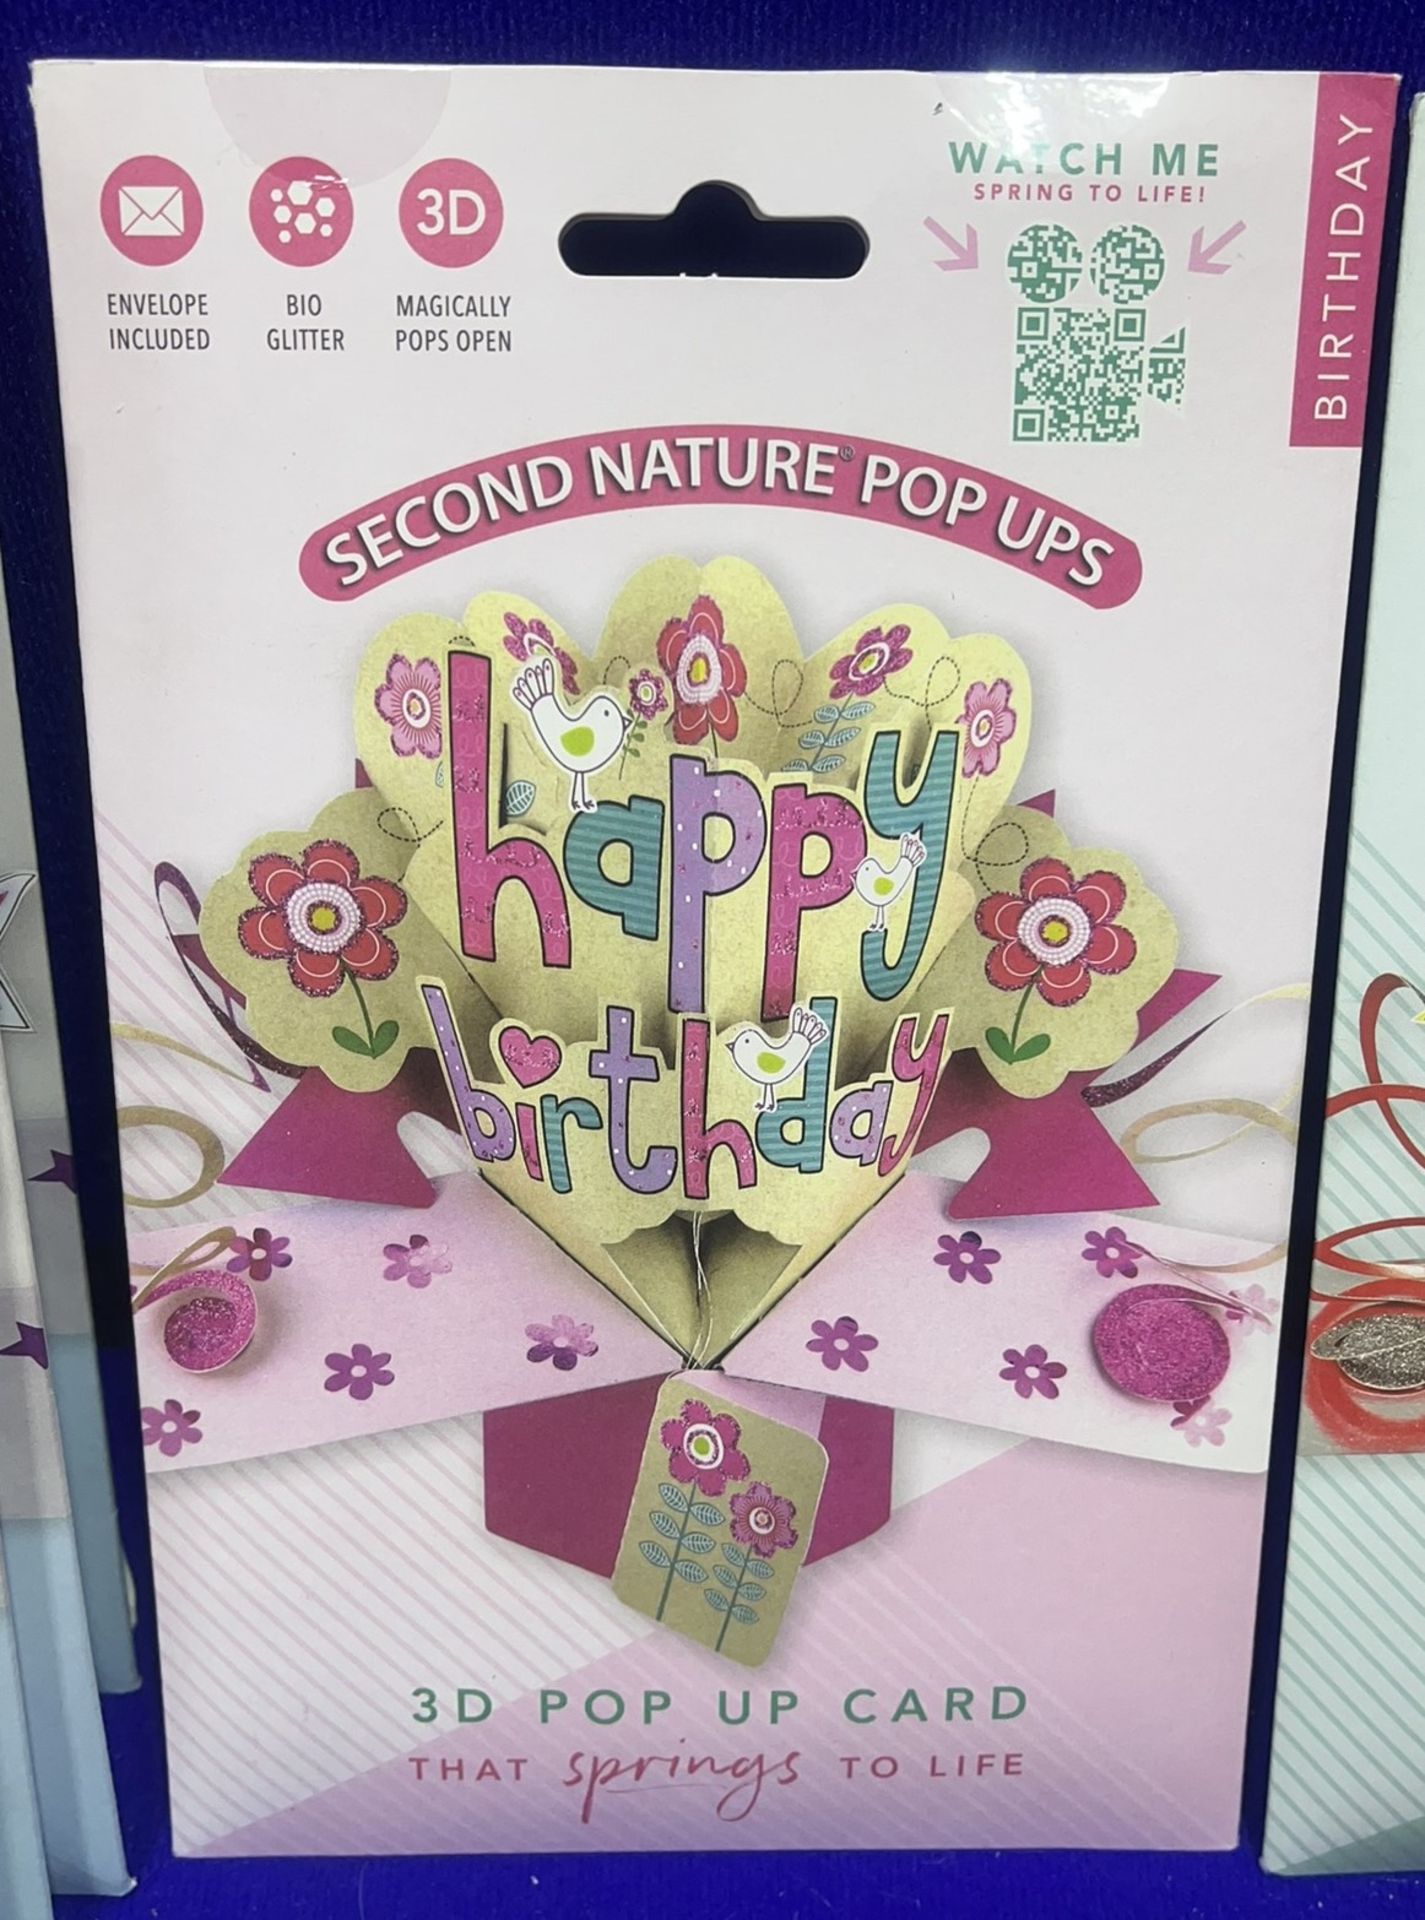 50 x Second Nature Pop Ups 3D Pop Up Cards - Image 5 of 14